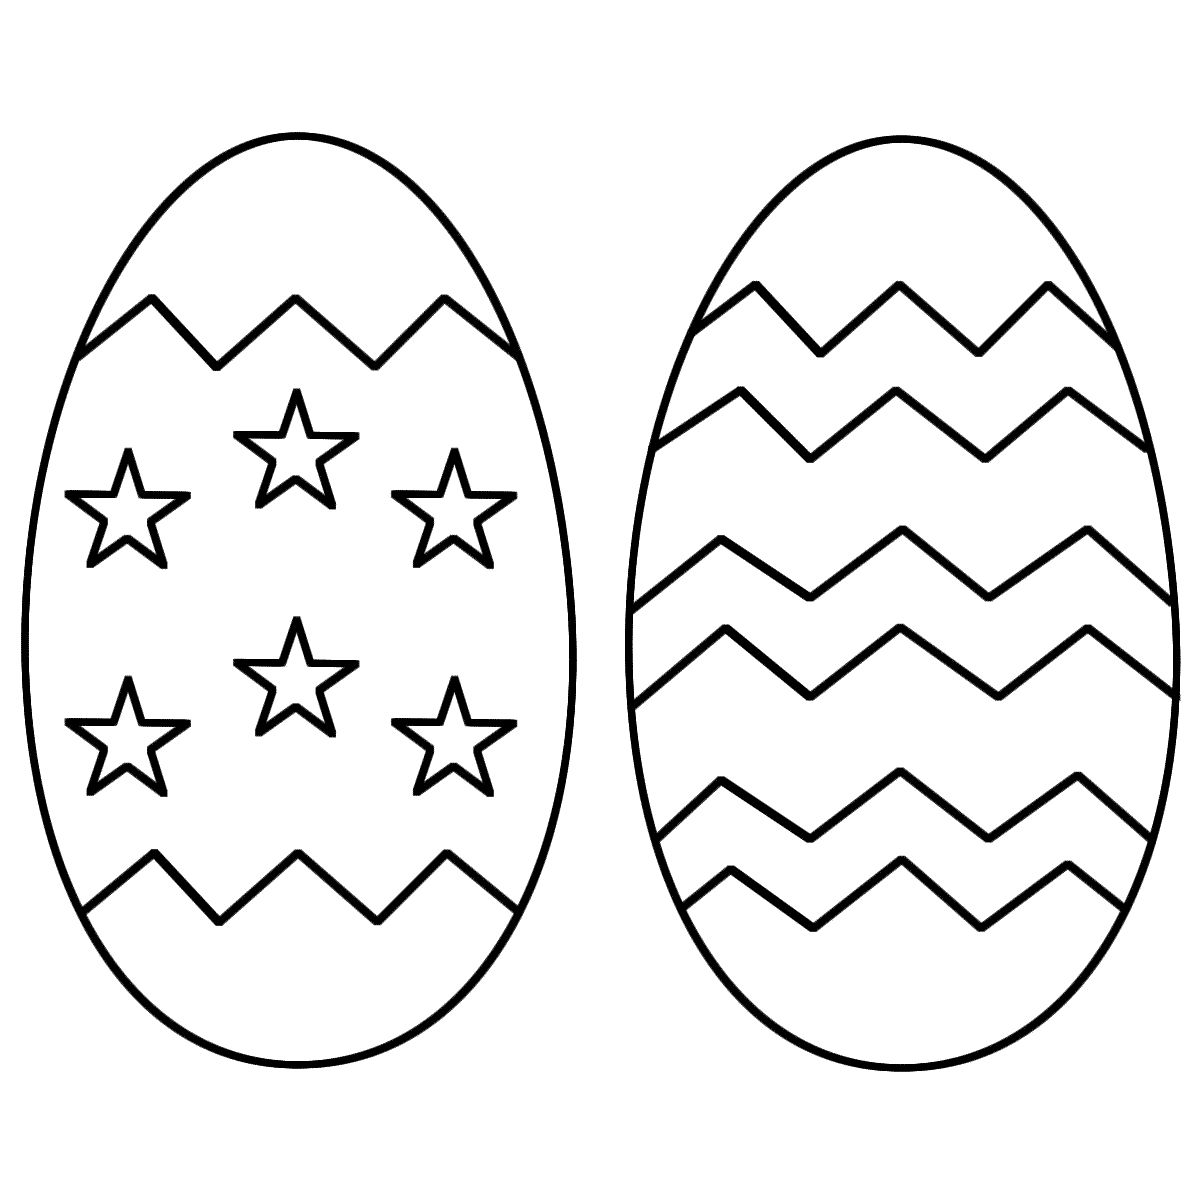 Two Easter Eggs with stars and patterns - Coloring Page (Easter)